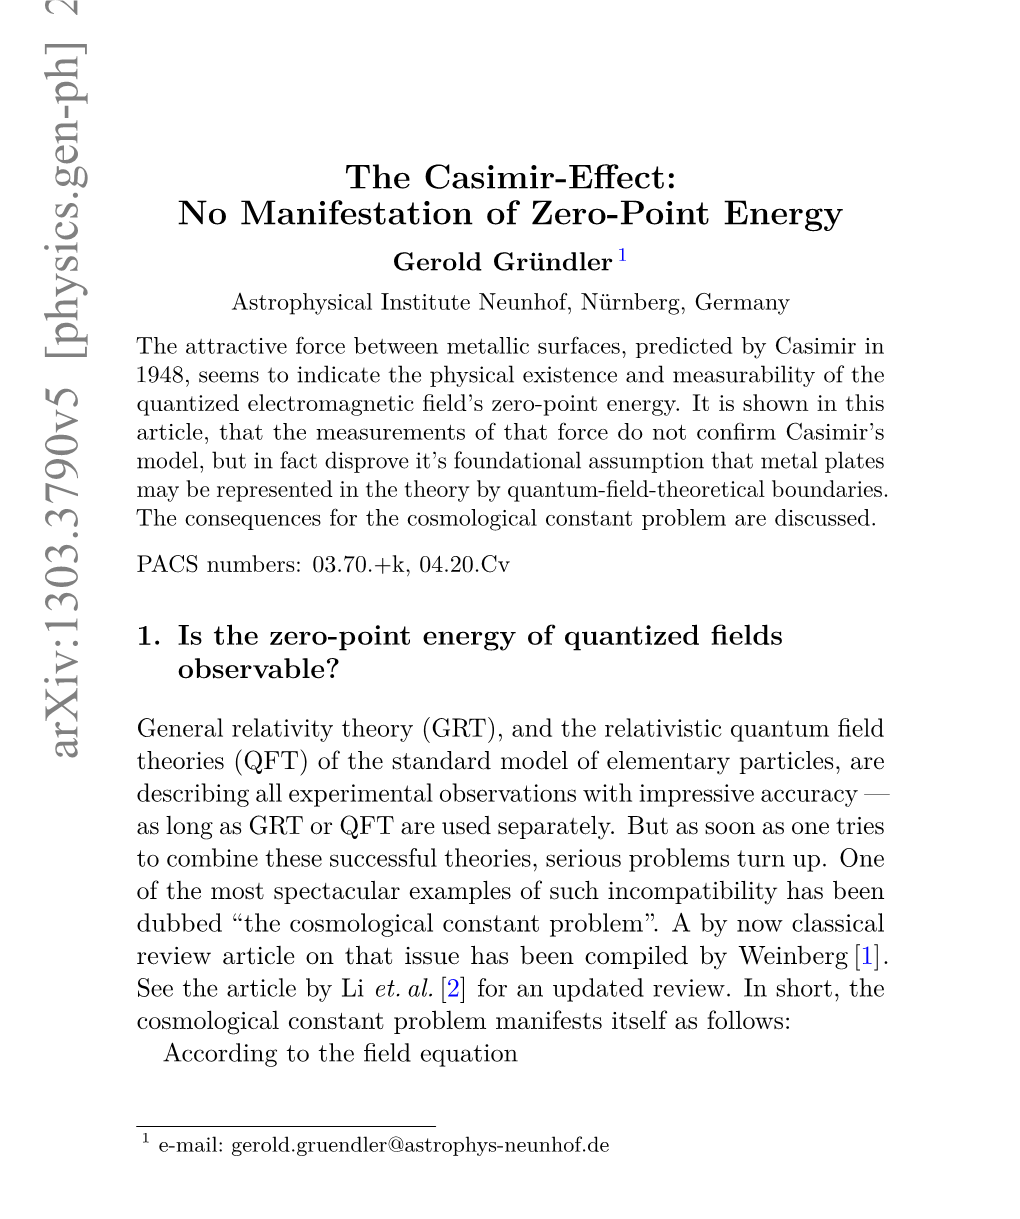 The Casimir-Effect